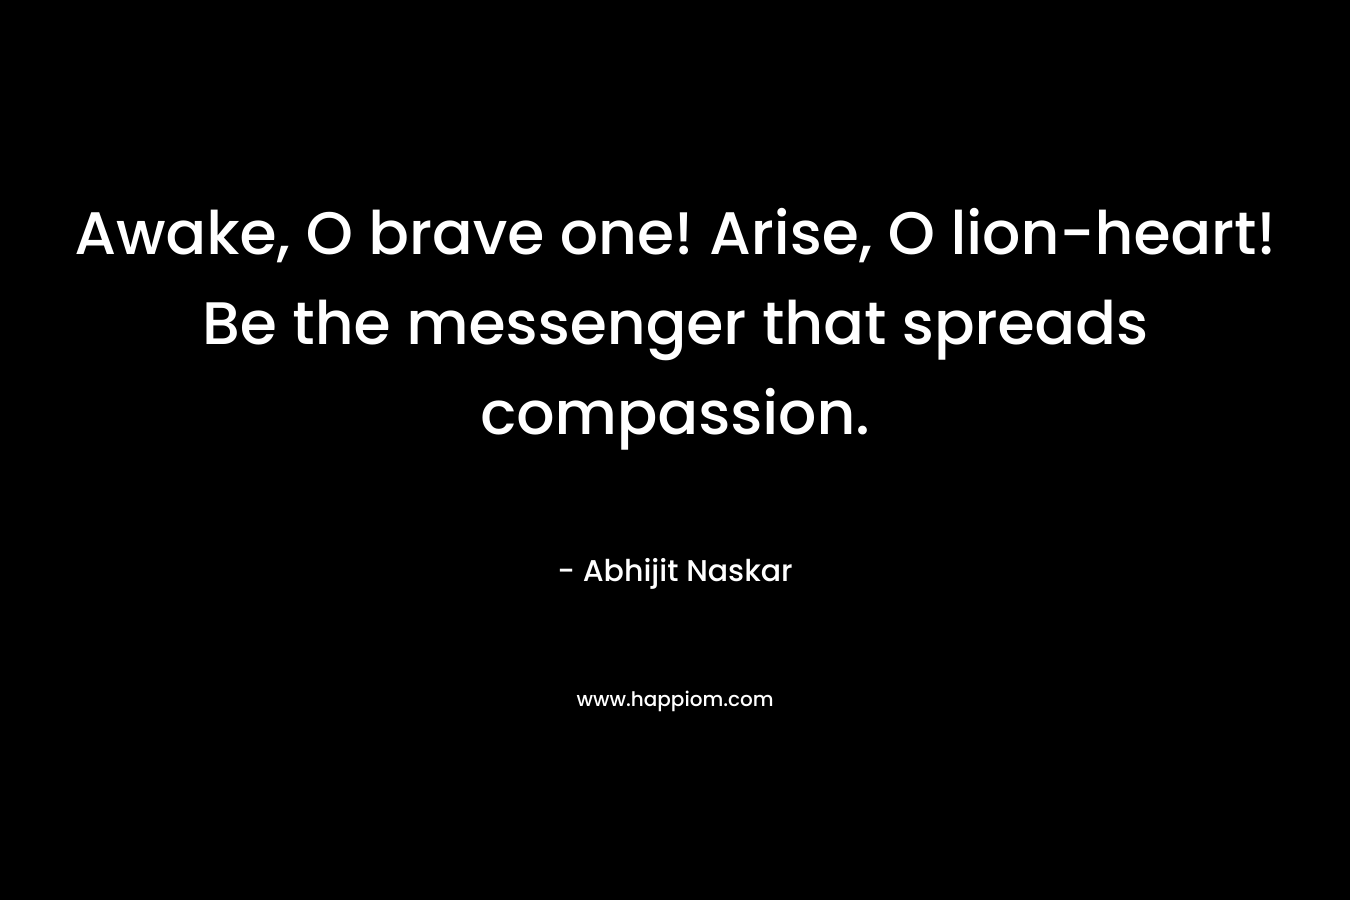 Awake, O brave one! Arise, O lion-heart! Be the messenger that spreads compassion.